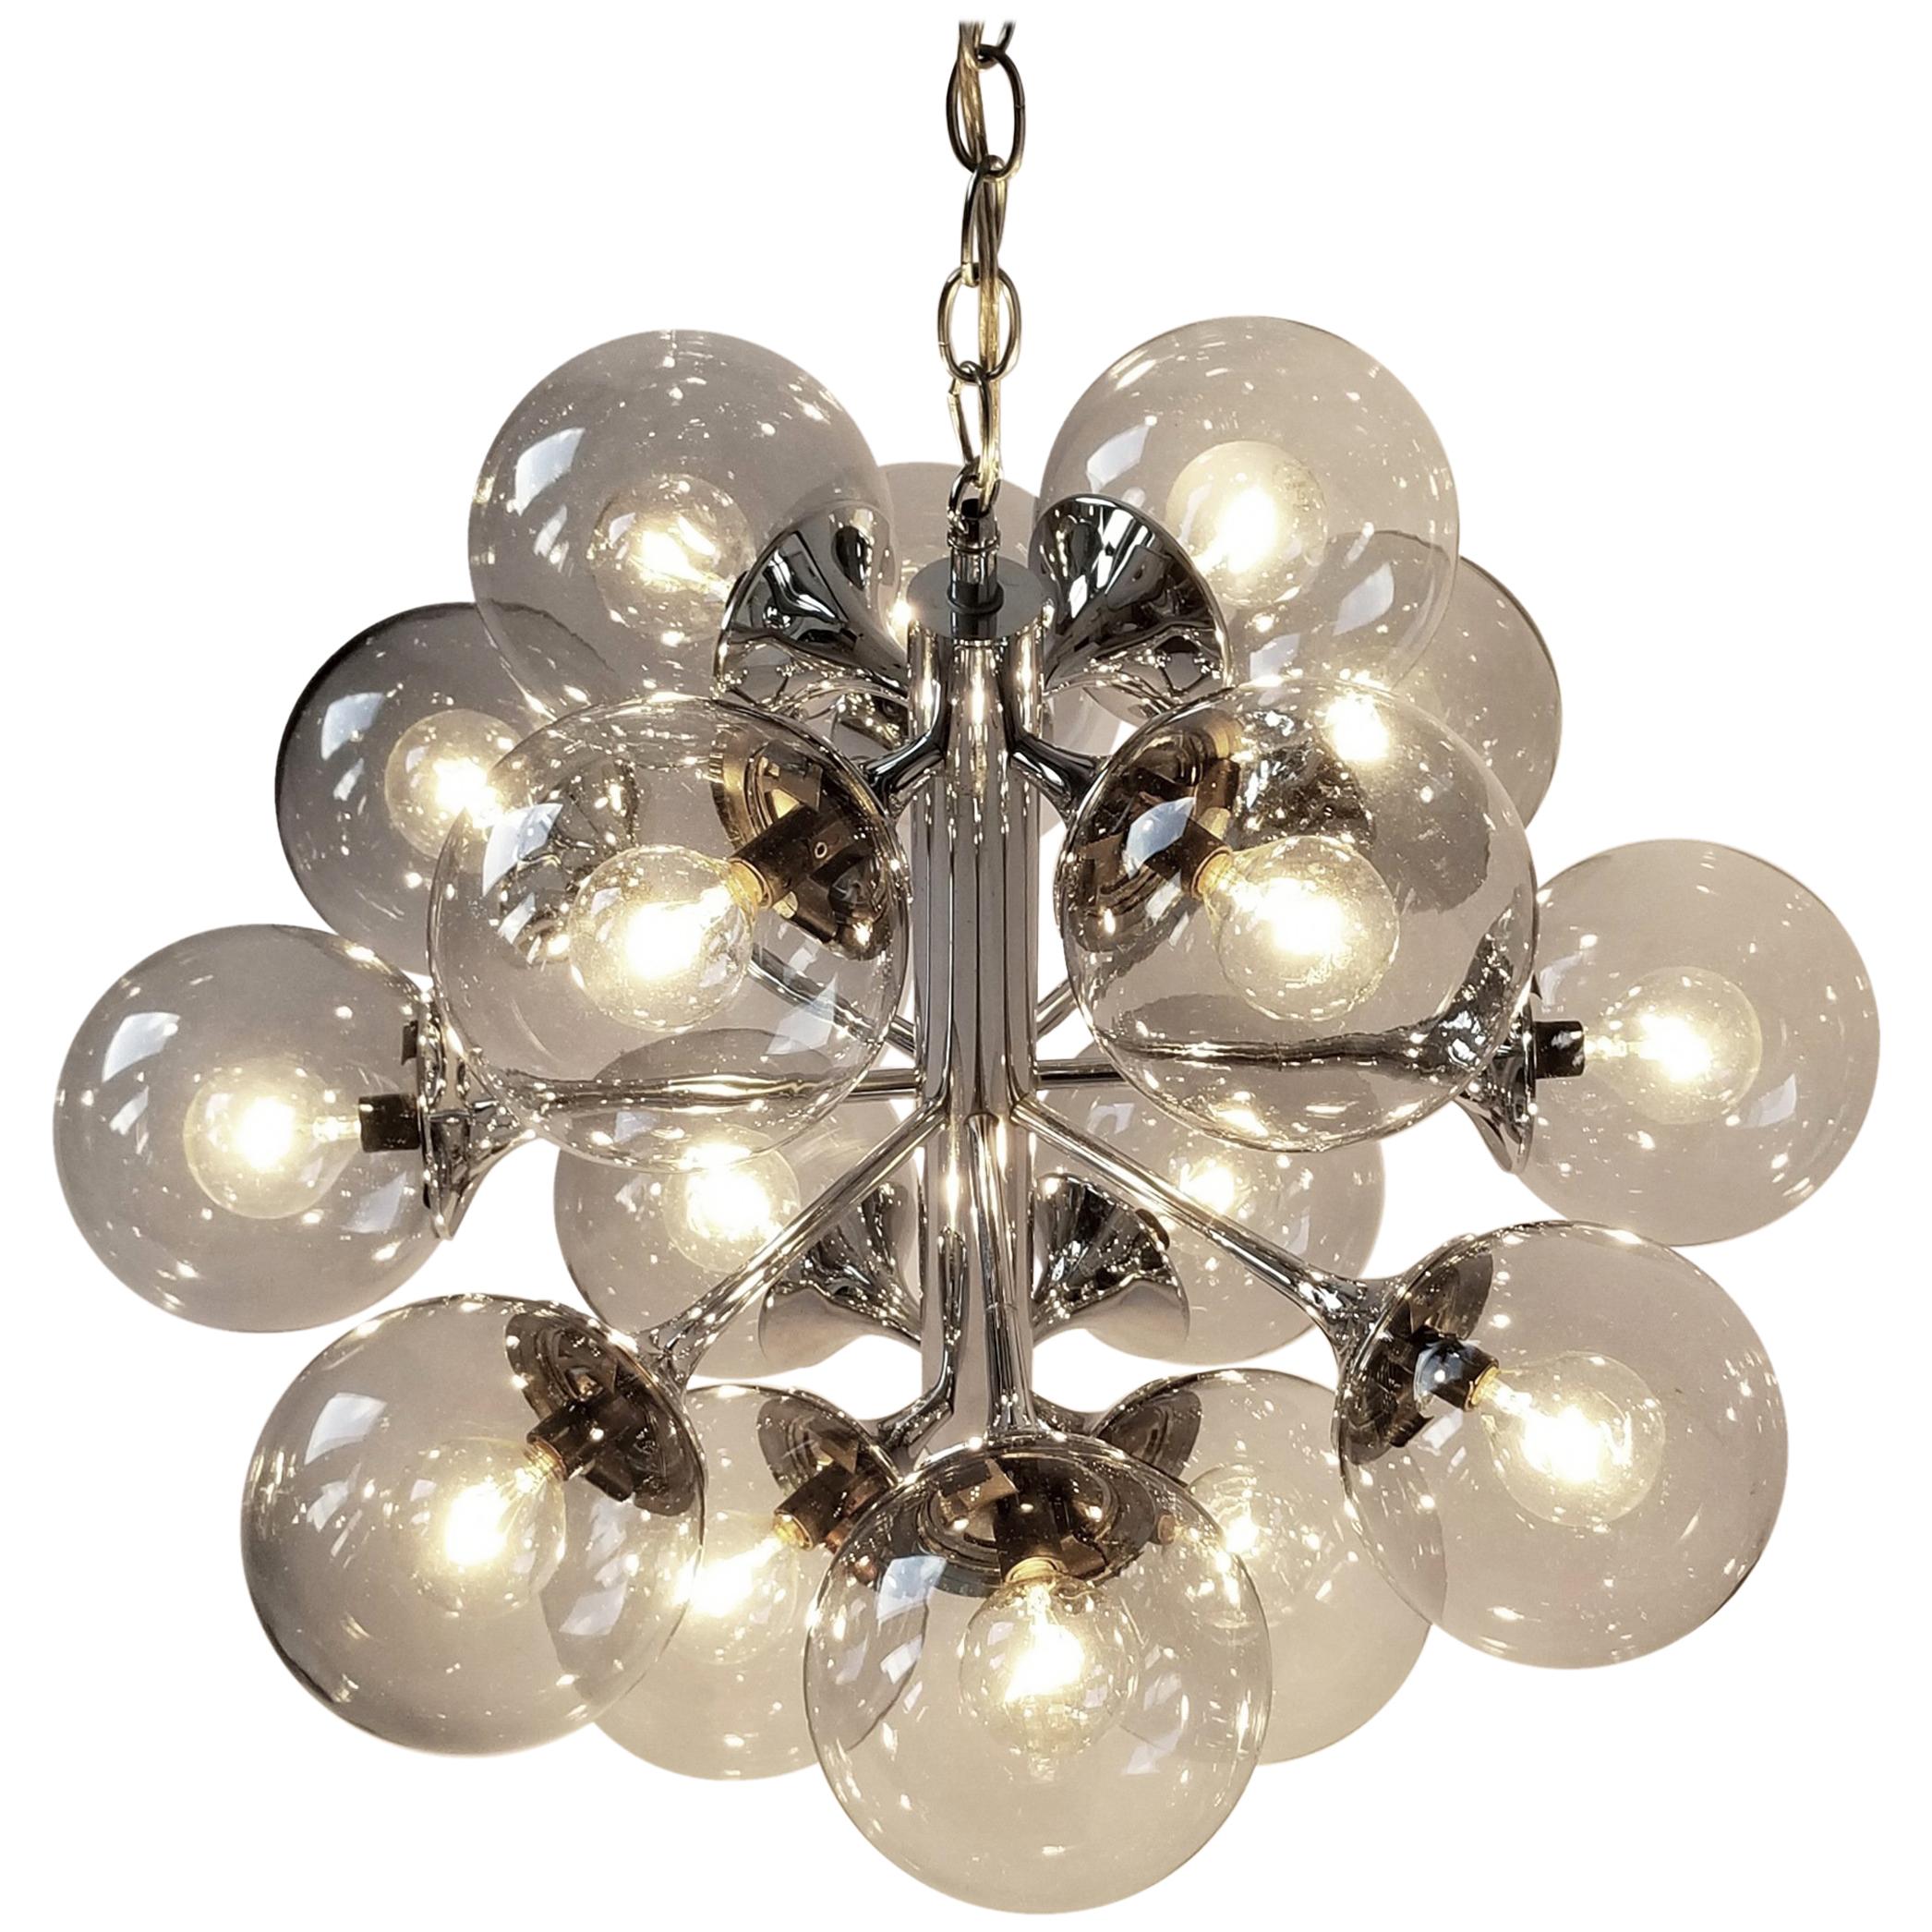 What are chandelier pendants?